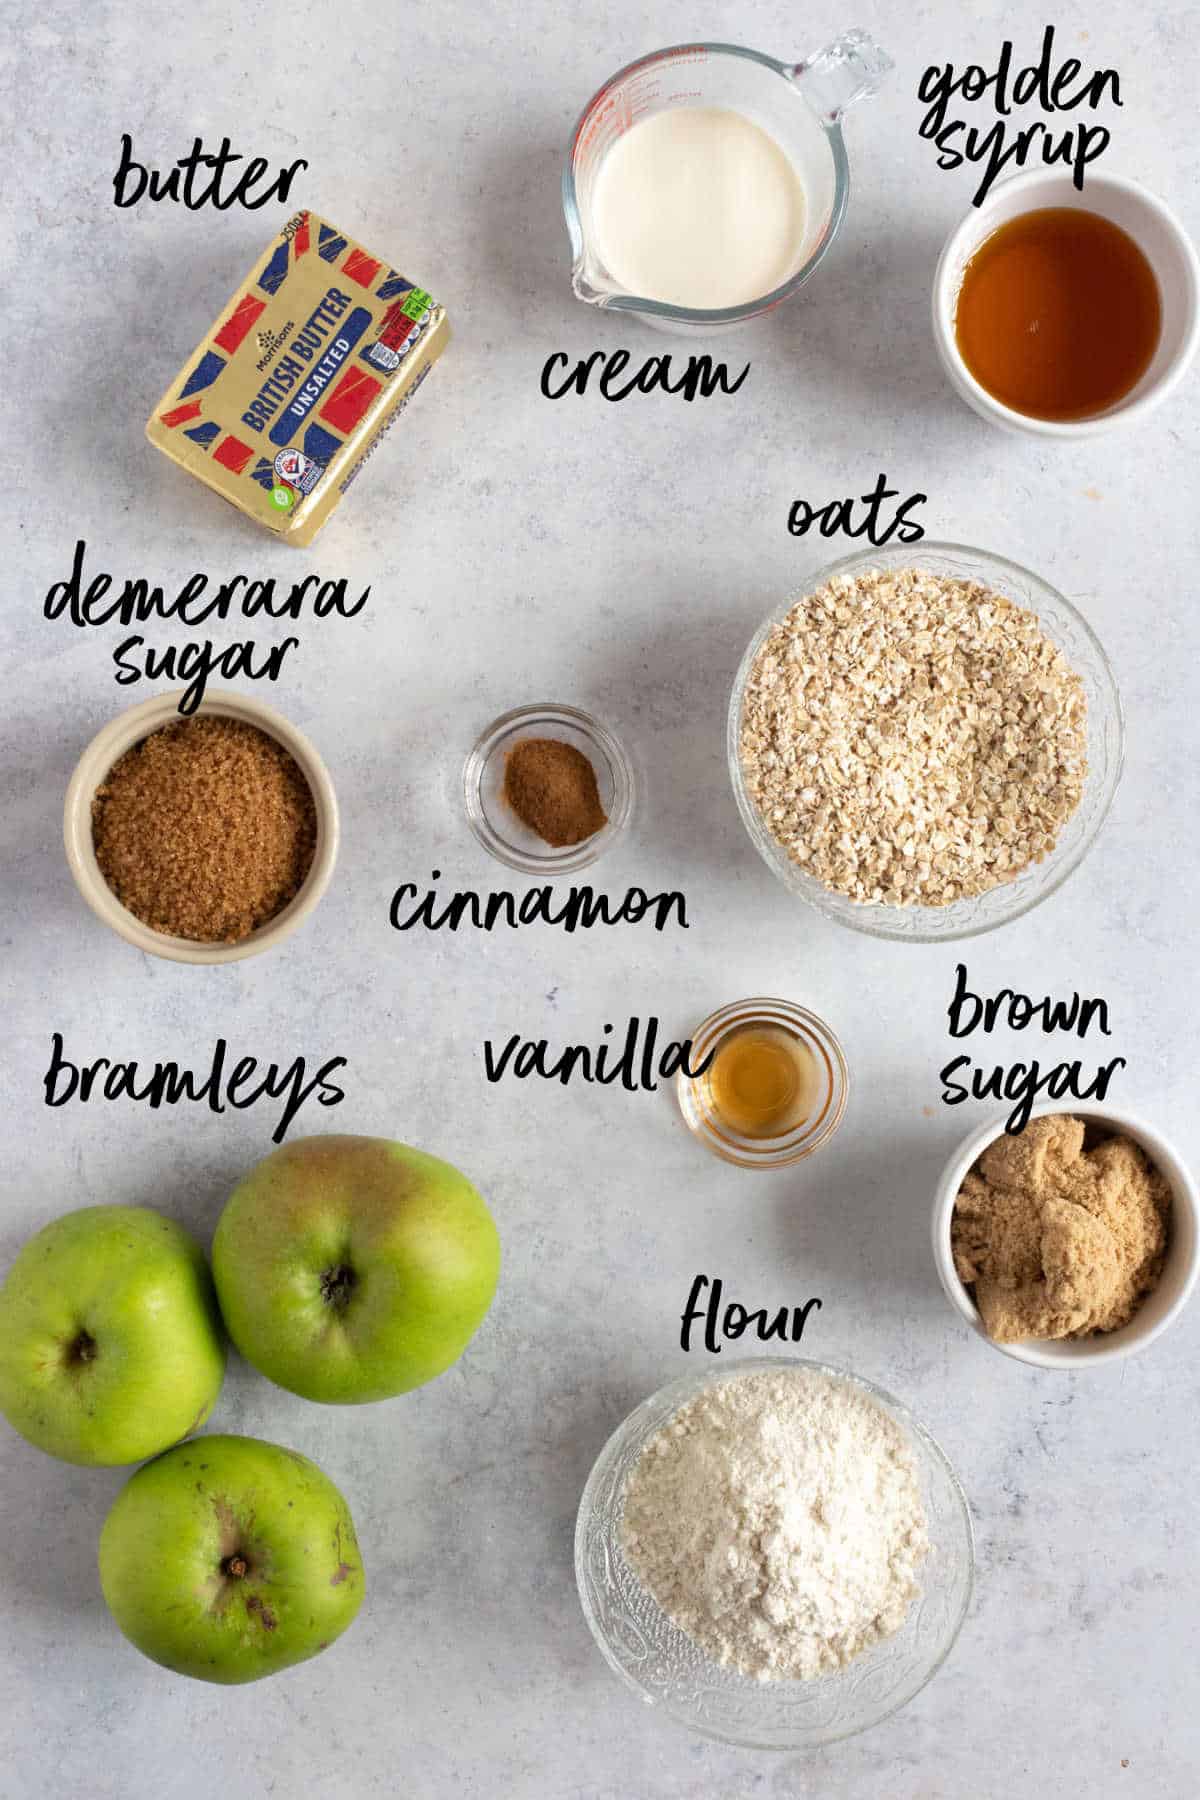 Ingredients for the toffee apple crumble.